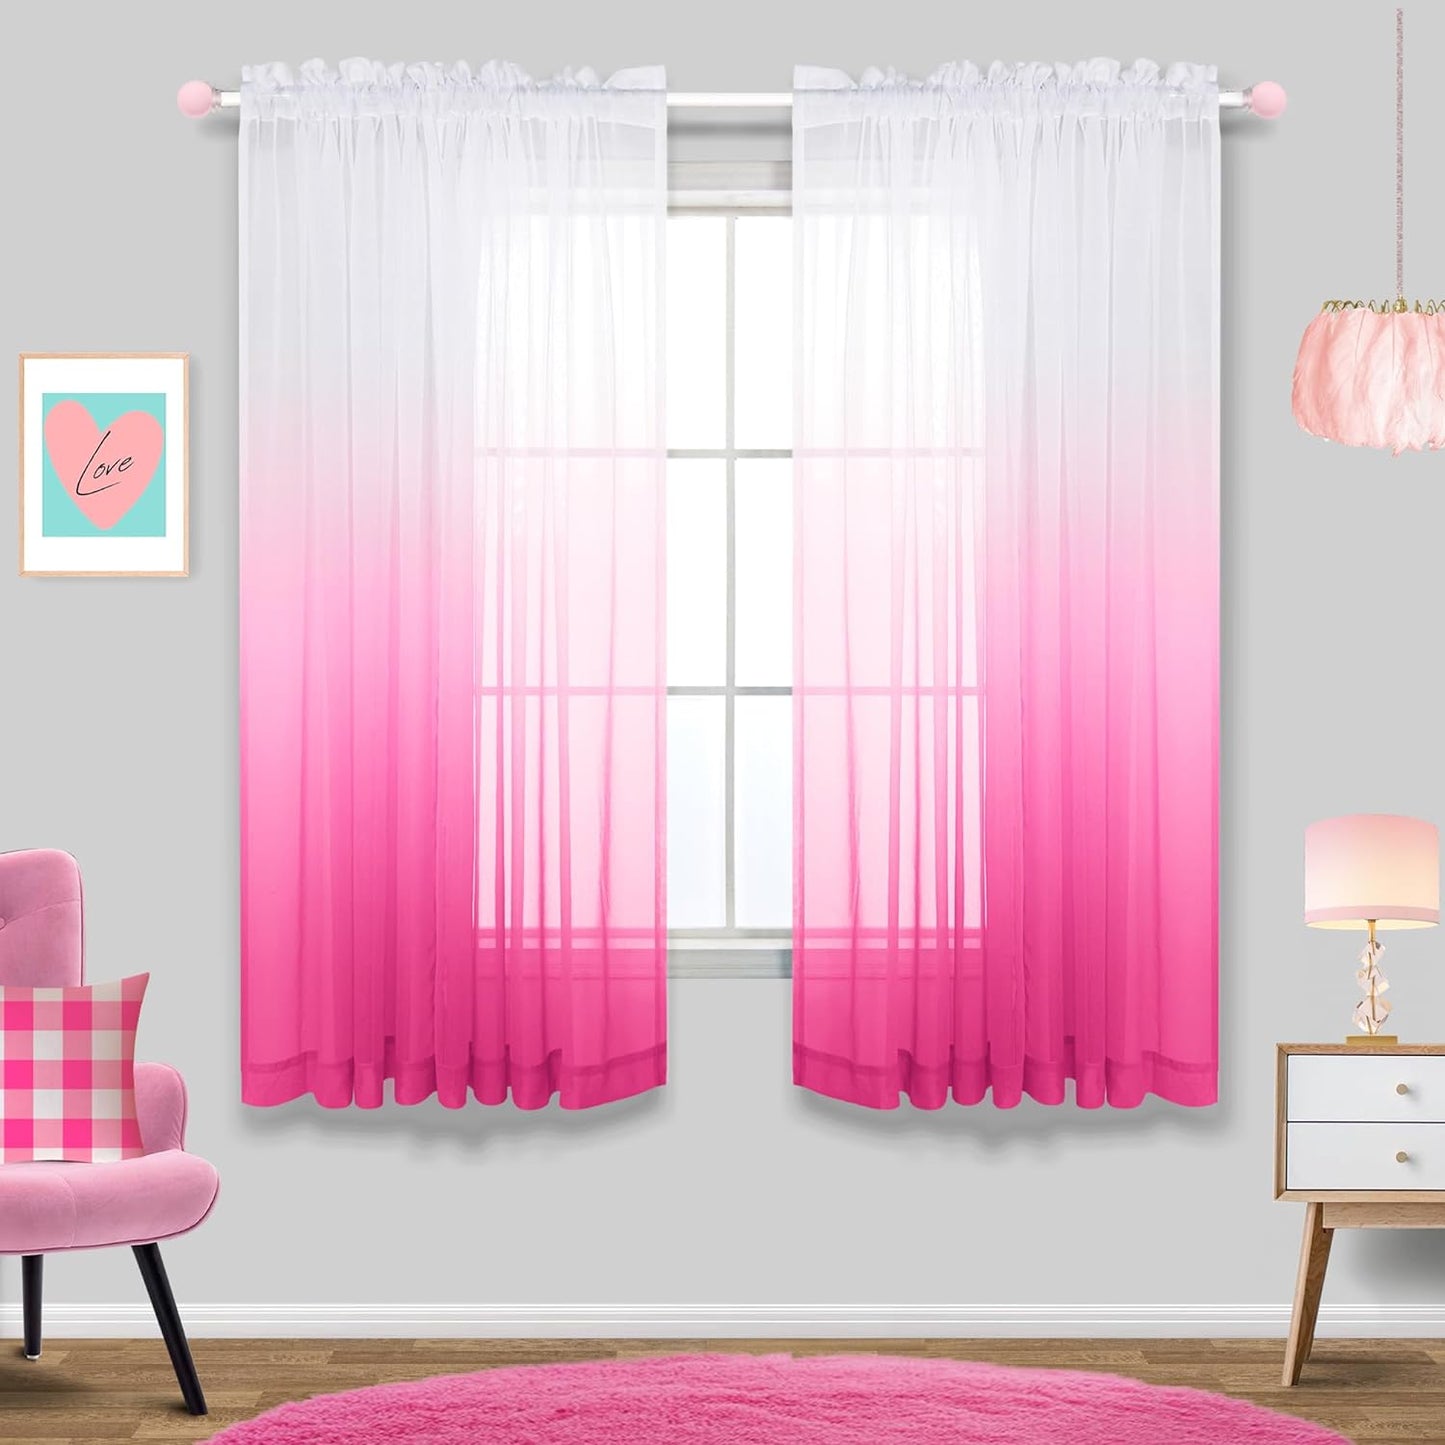 KOUFALL Sage Green Curtains 63 Inch Length for Living Room,2 Panel Set Rod Pocket Boho Curtains for Bedroom 63 Inches Long  KOUFALL TEXTILE Pink 52X63 